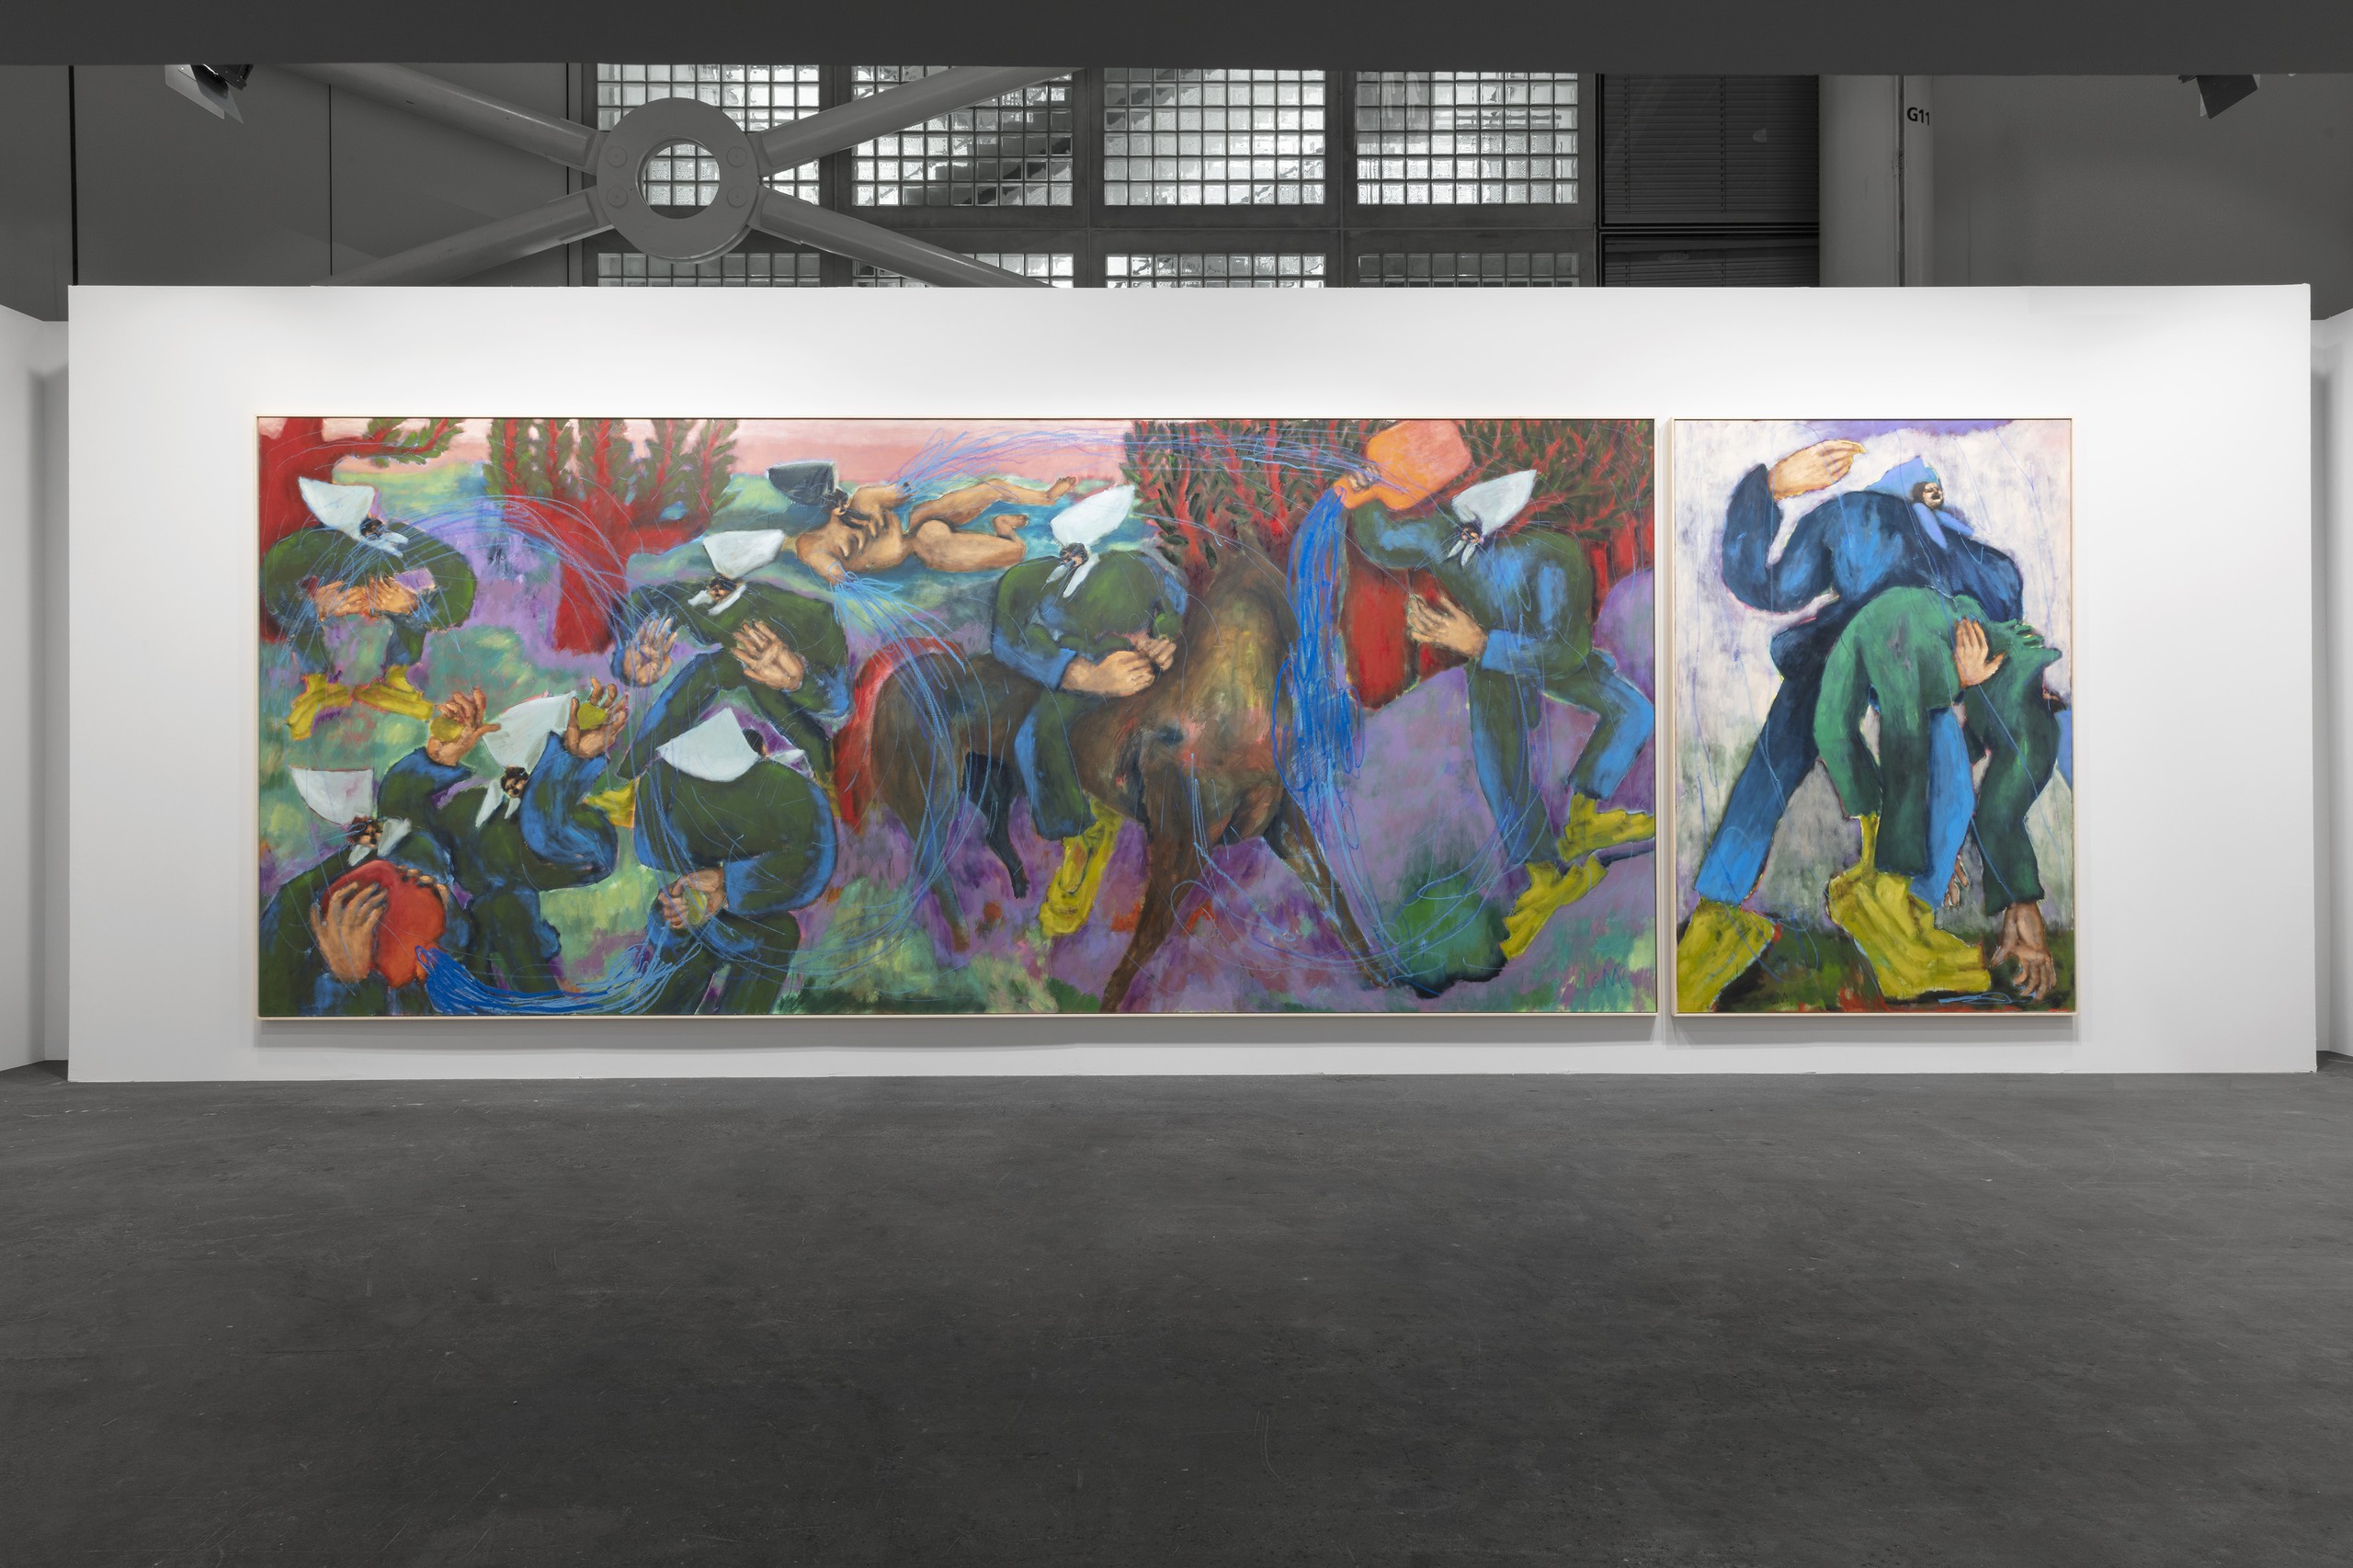 Installation view, Art Basel Unlimited 2023, curated by Giovanni CarmineConny MaierThe Source, 2023Oil, oil stick, pigments on canvasPanel 1: (300 x 700 cm // 118 x 275 1/2 in)Panel 2: (300 x 200 cm // 118 x 78 1/2 in)